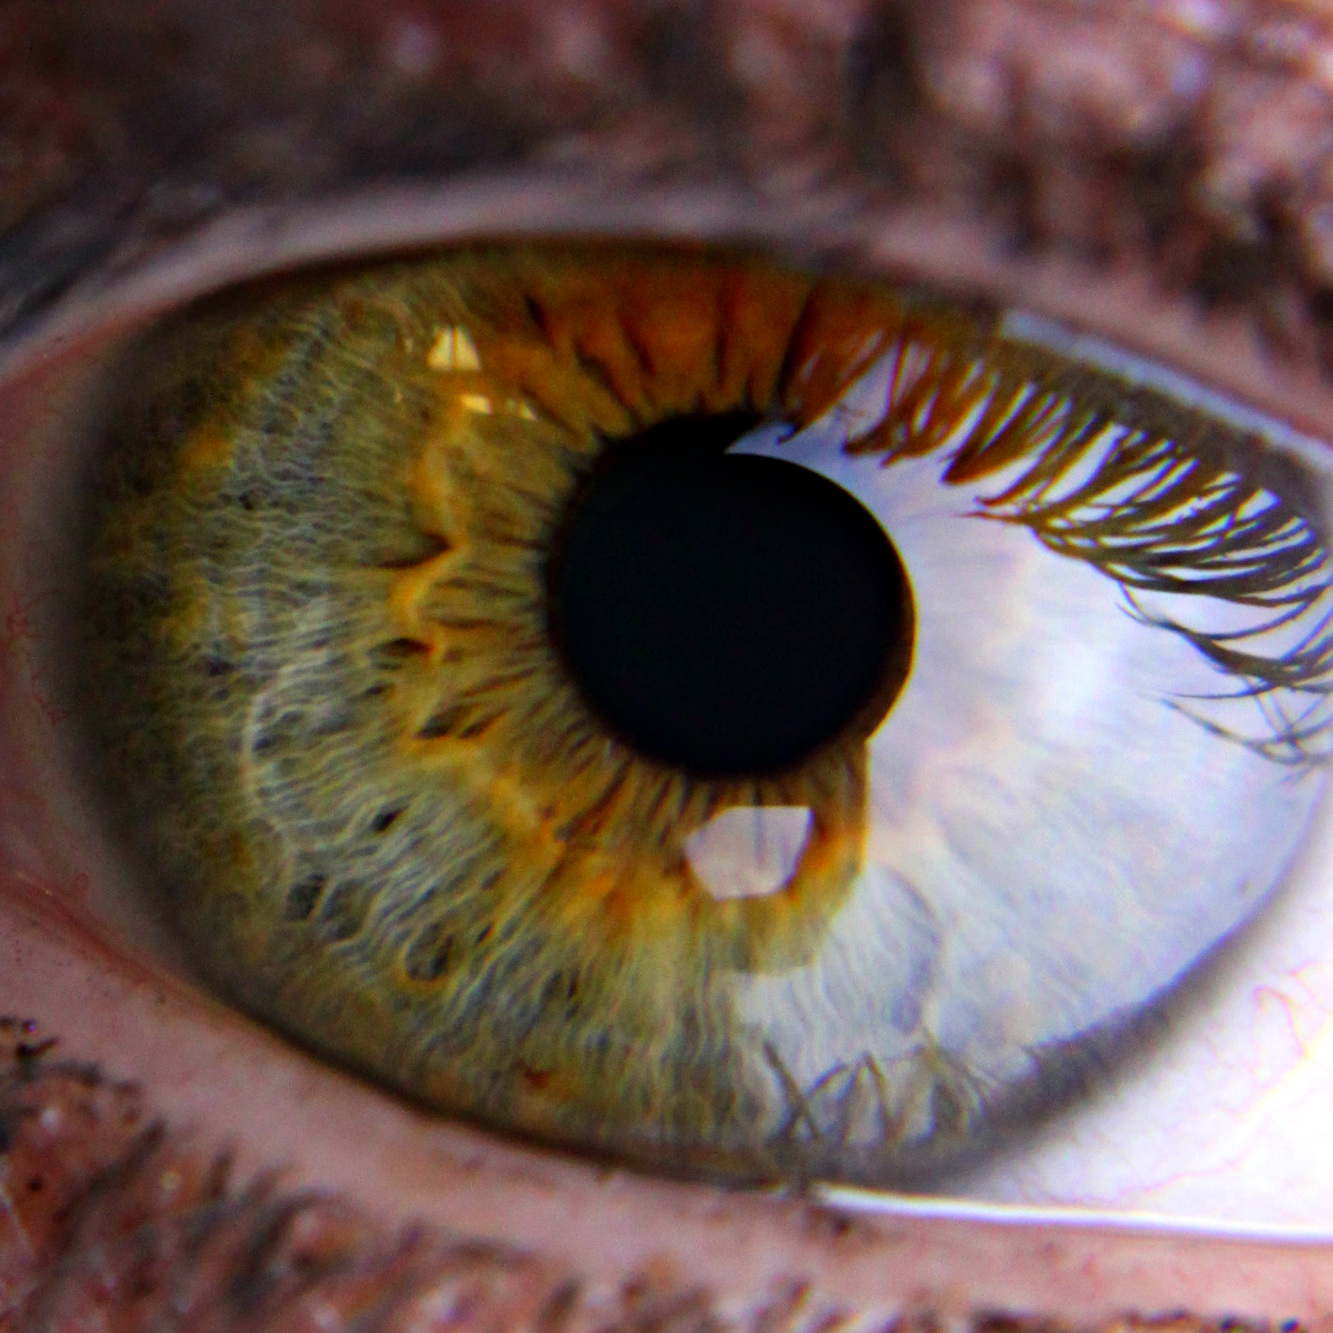 an eyeball shows the yellow, brown and orange colors